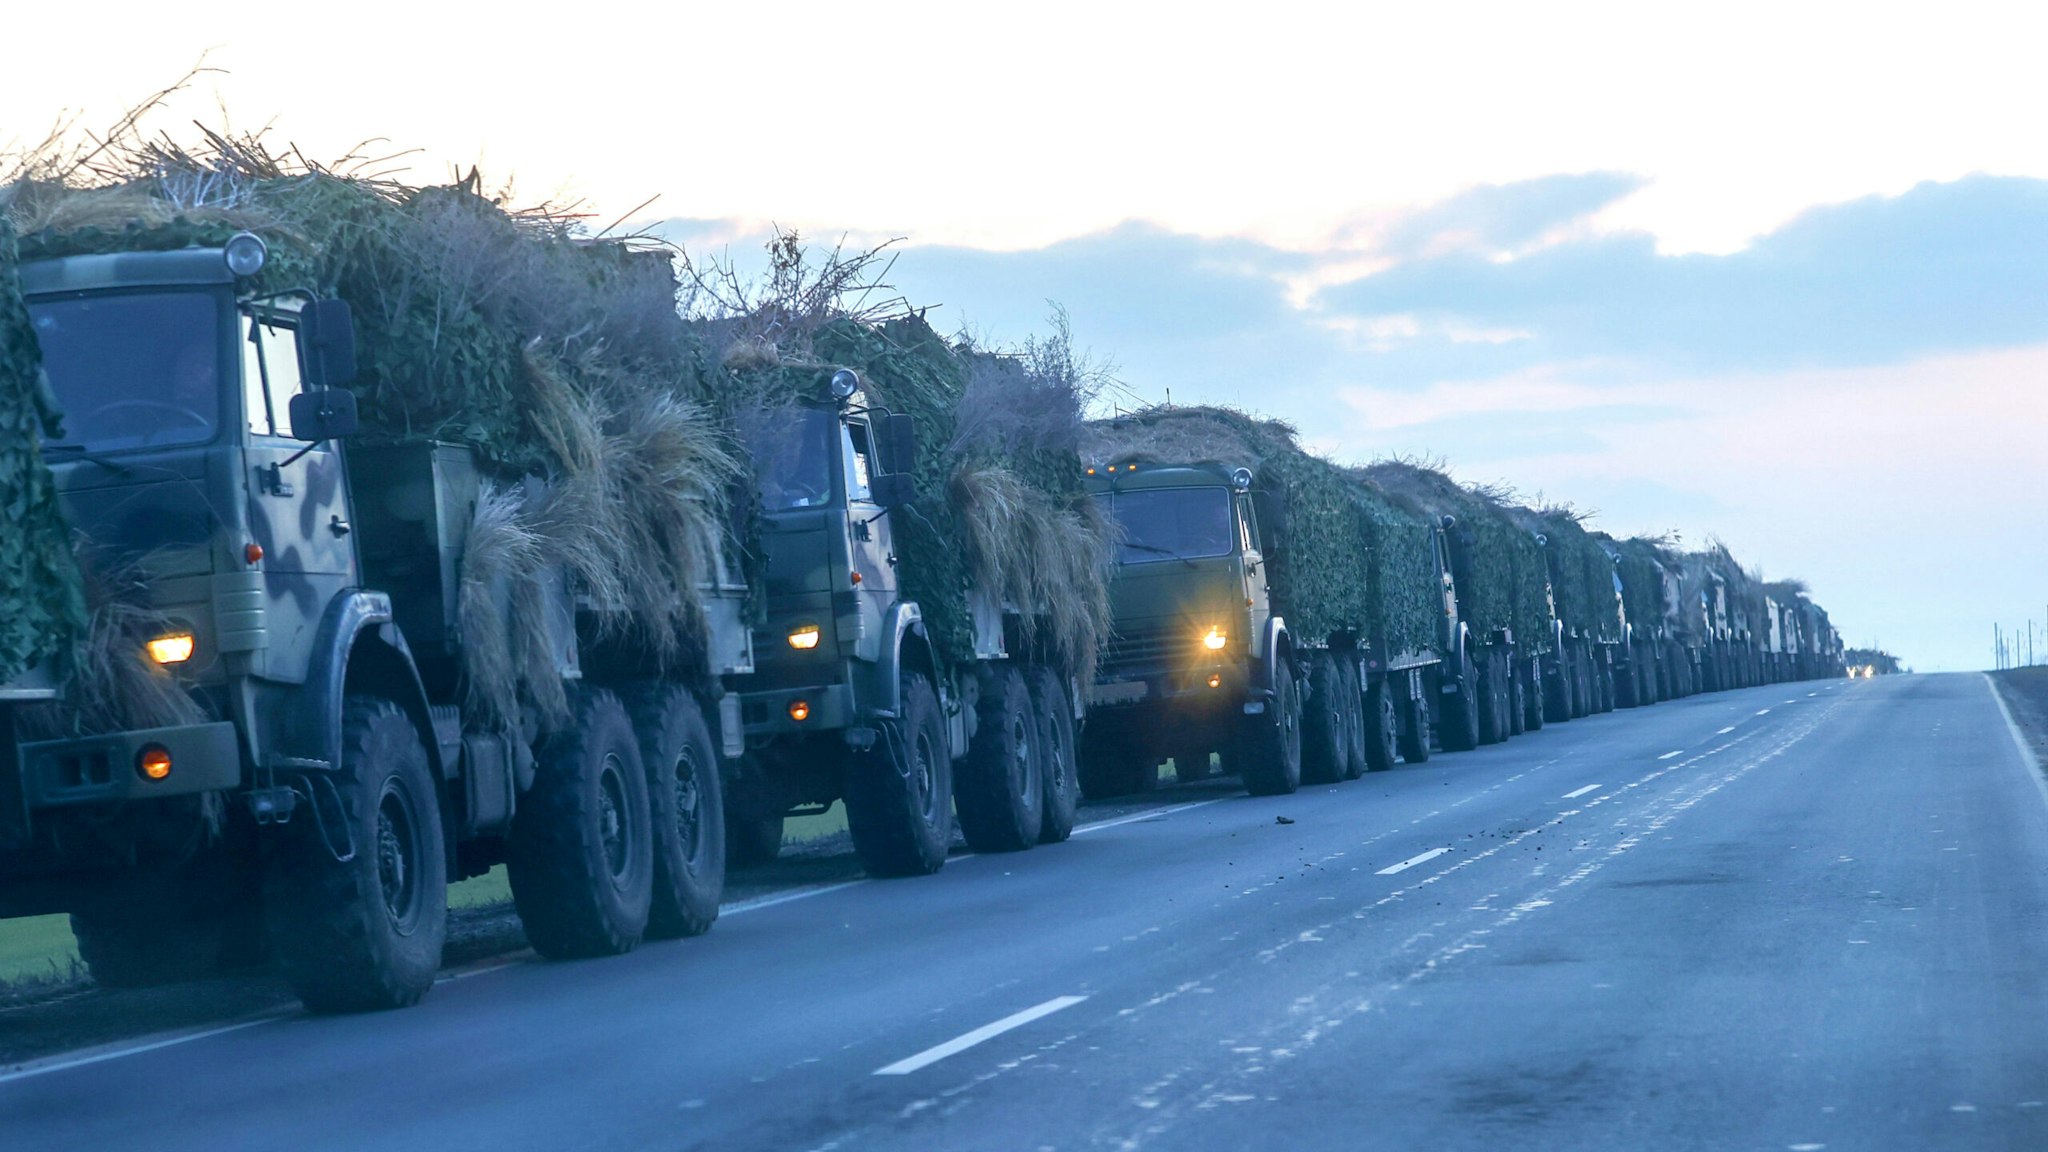 ROSTOV, RUSSIA - FEBRUARY 23: A convoy of Russian military vehicles is seen as the vehicles move towards border in Donbas region of eastern Ukraine on February 23, 2022 in Russian border city Rostov.